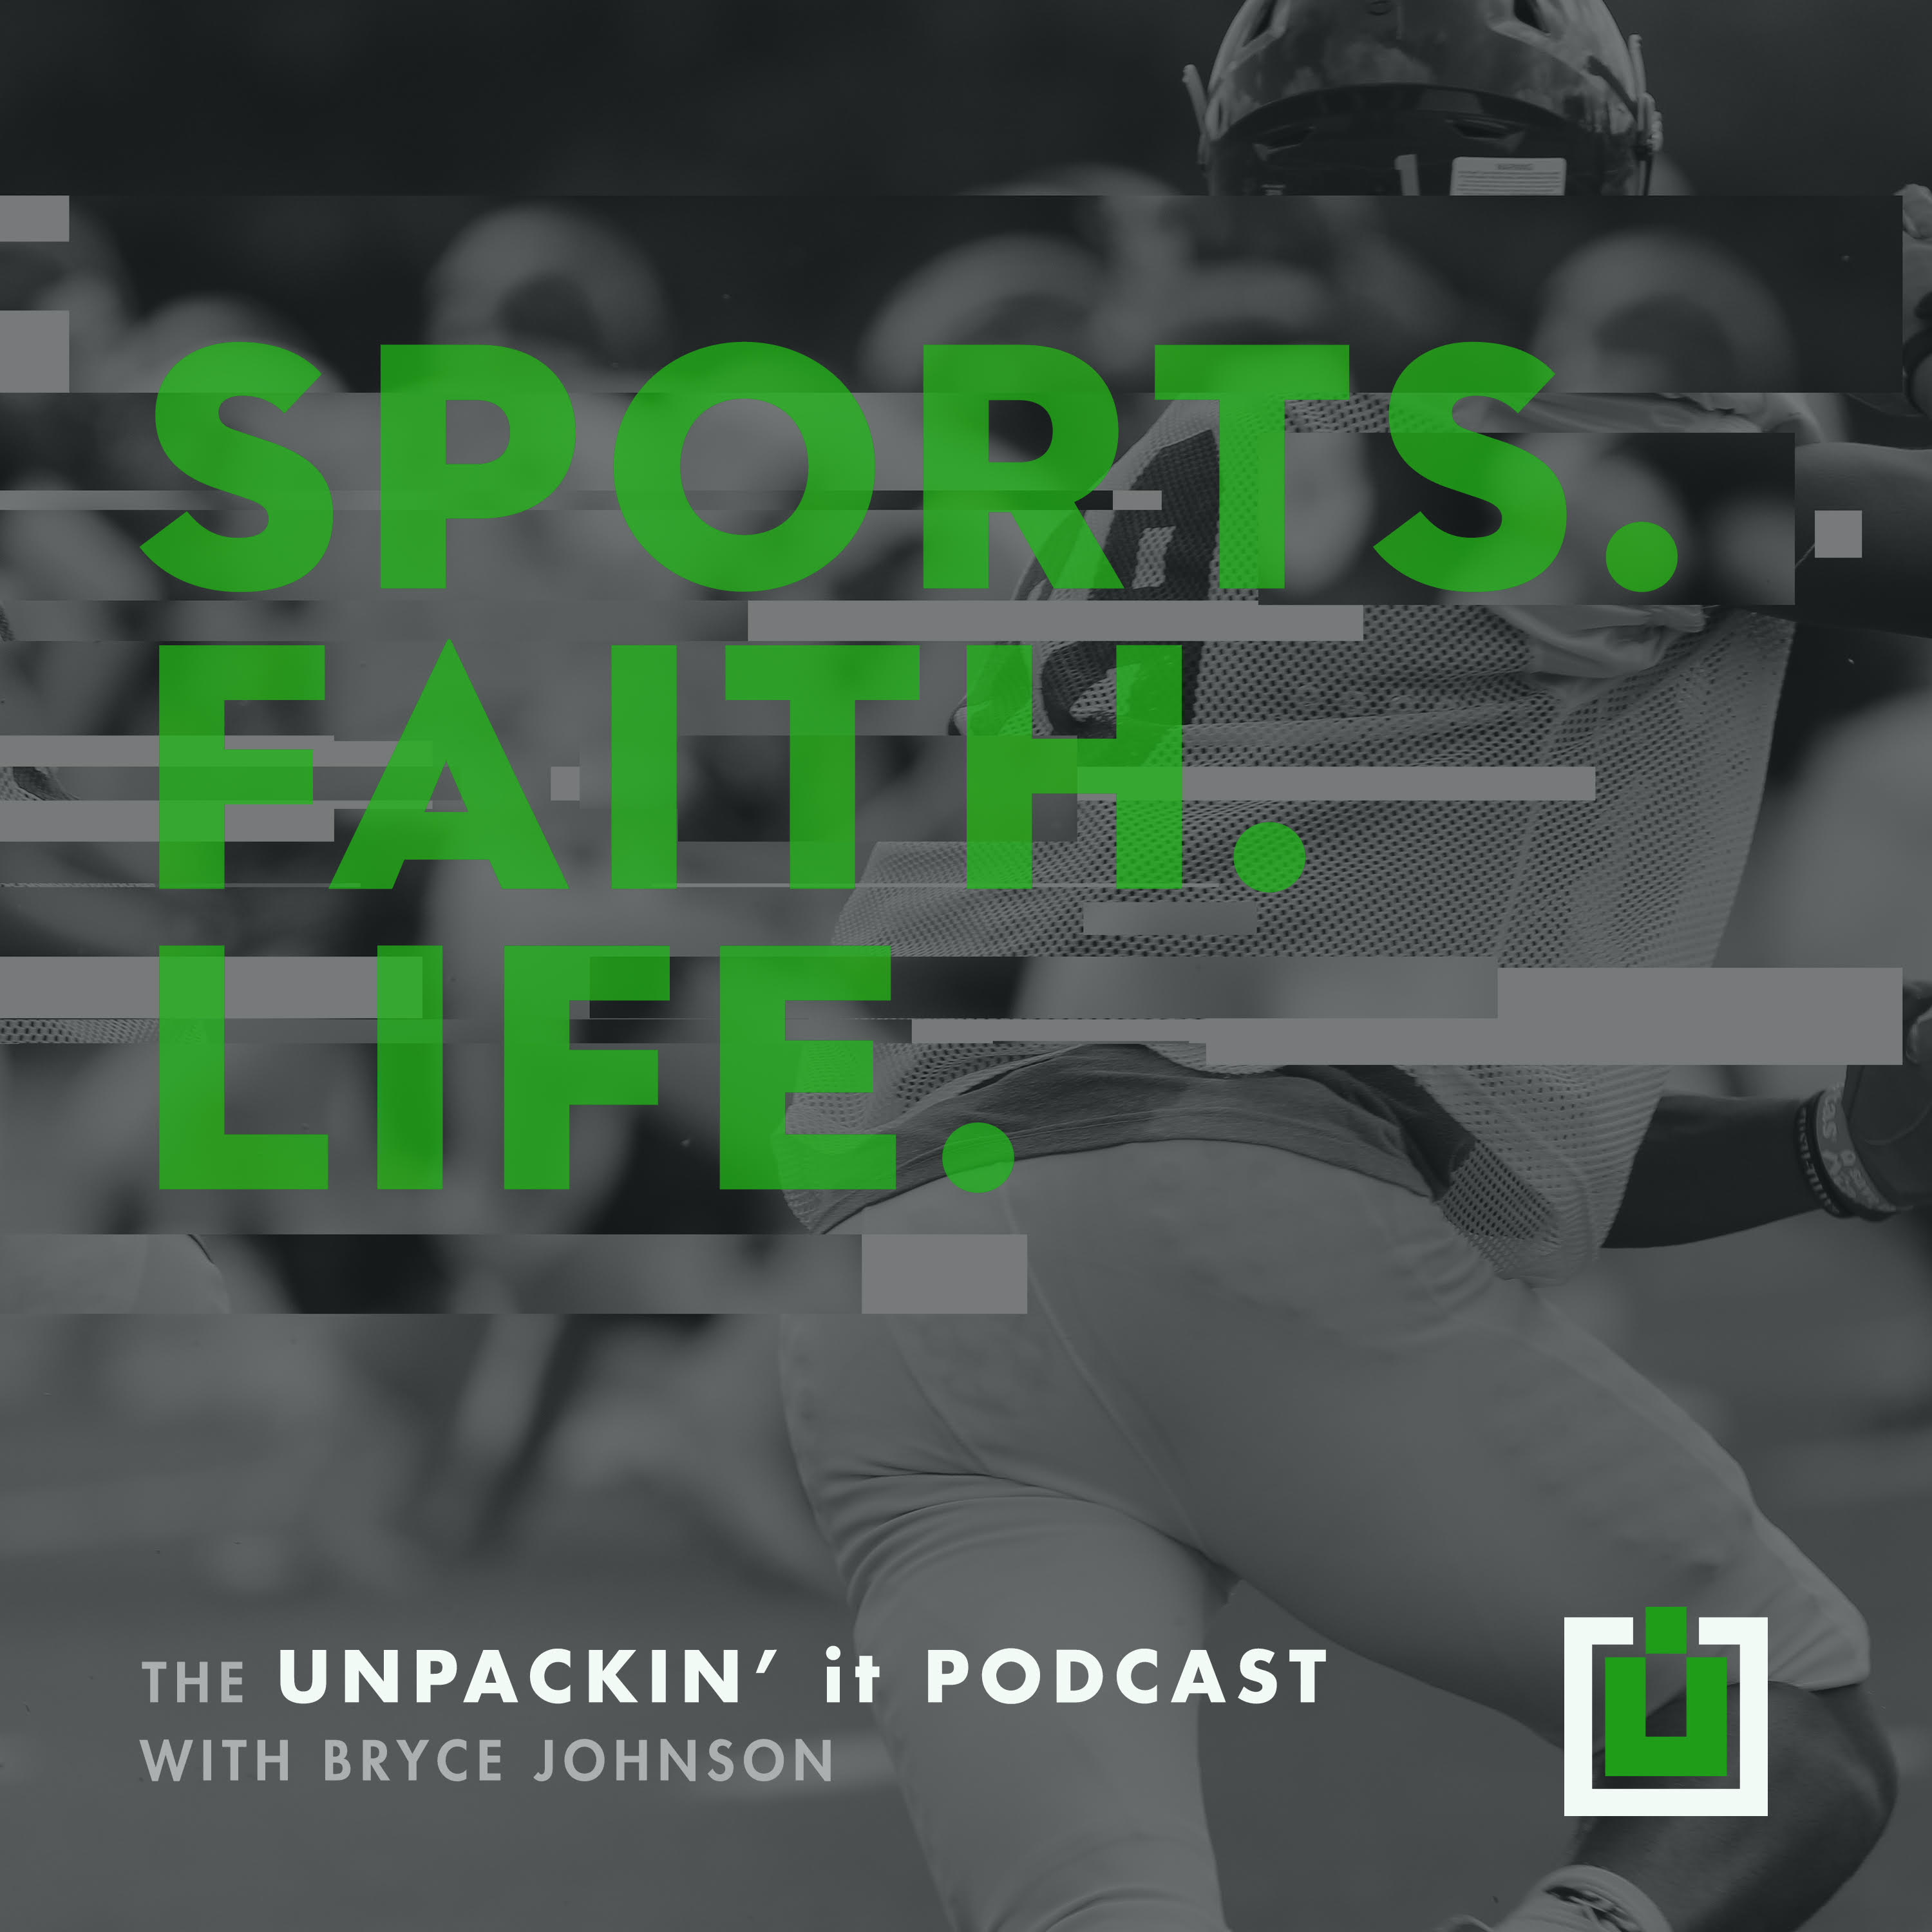 The UNPACKIN' it Podcast